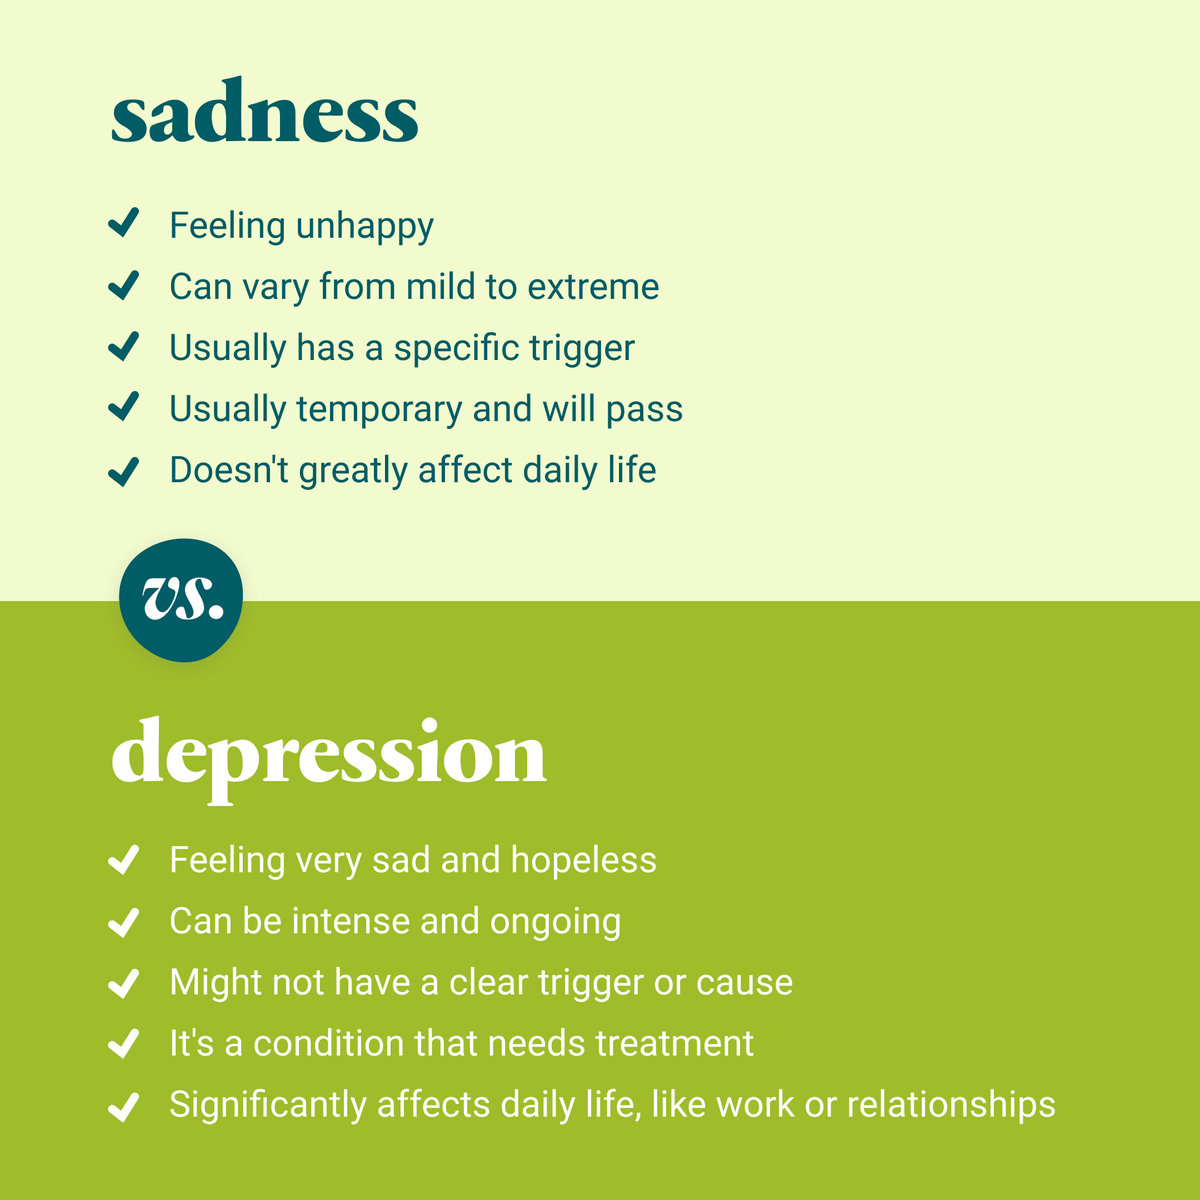 Understanding teenage sadness vs. depression can be challenging for parents, especially when teens may hide signs of depression. If you’re in NYC, @nychealthy is providing teens (ages 13-17) free therapy via talkspace. Sign up here: talkspace.com/nyc?utm_campai….